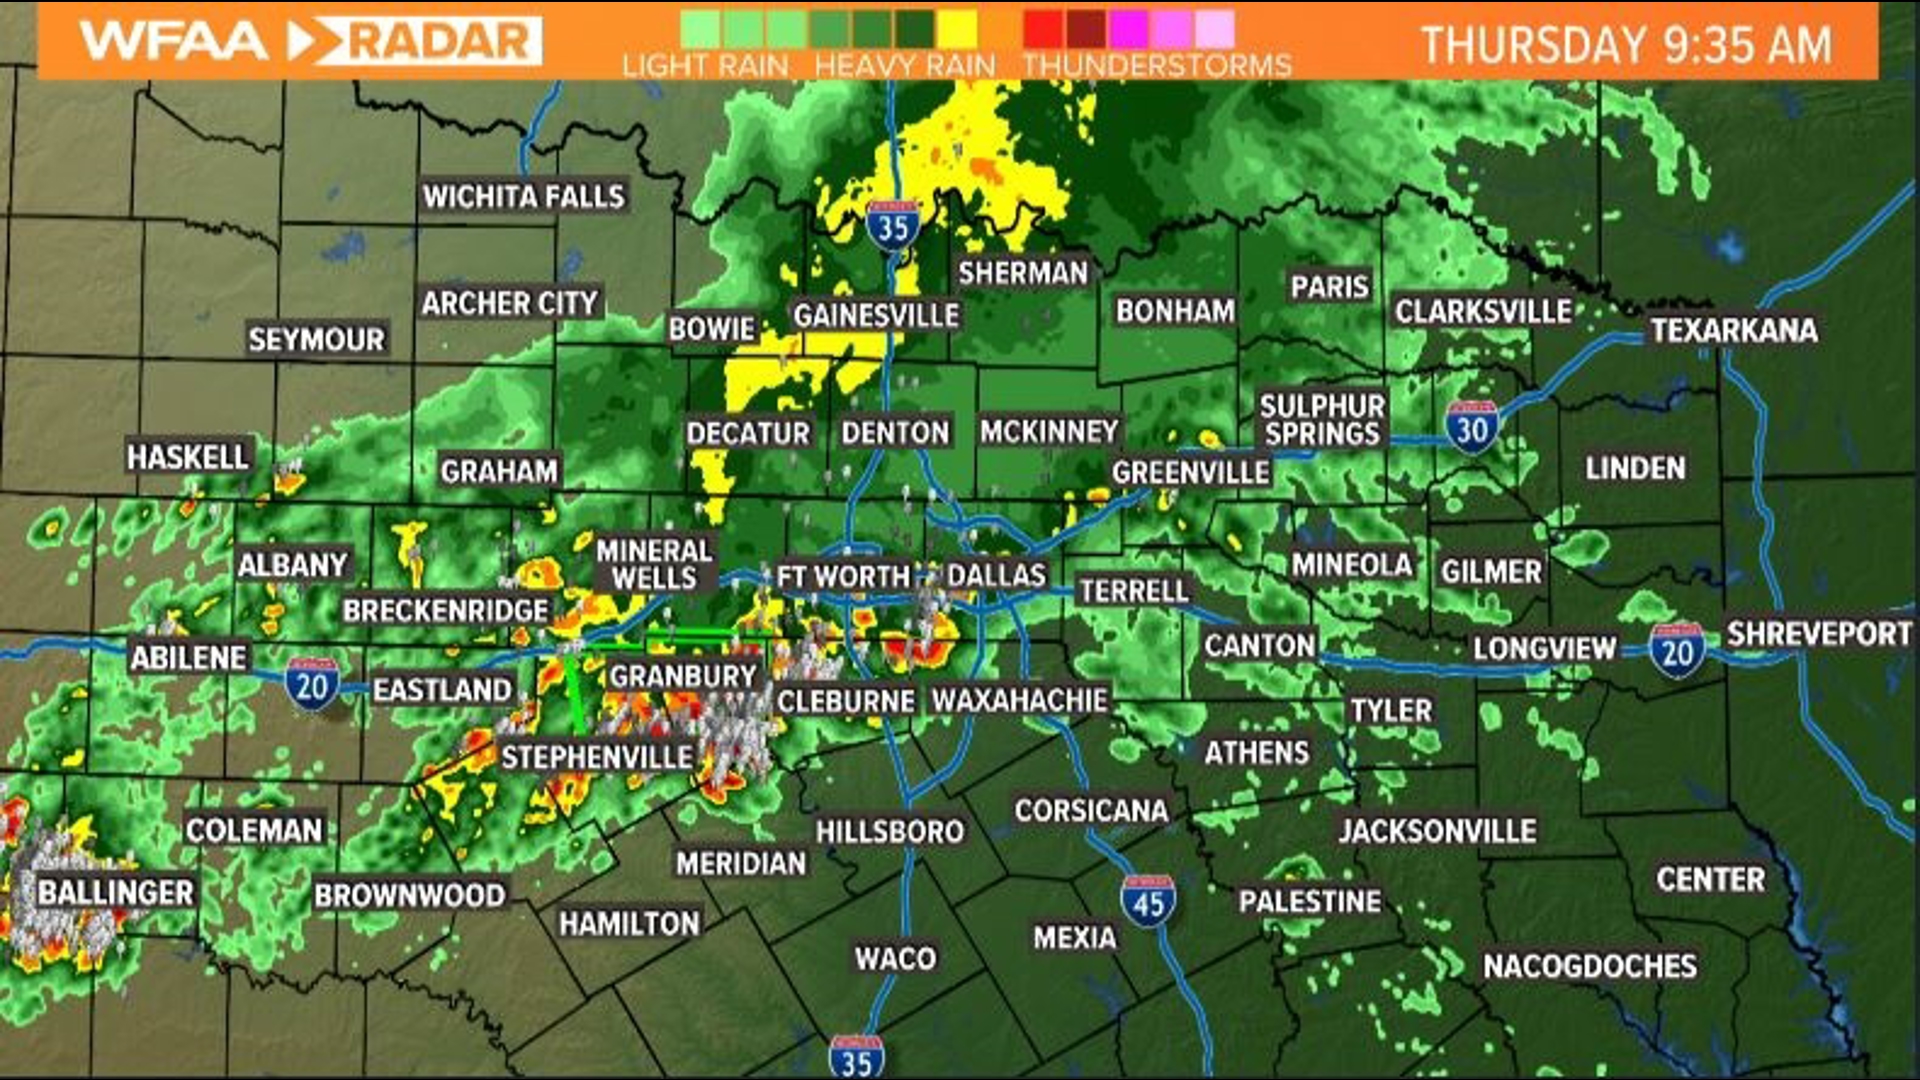 North Texas is seeing rounds of rain and storms Thursday. Here's a live look at the radar.